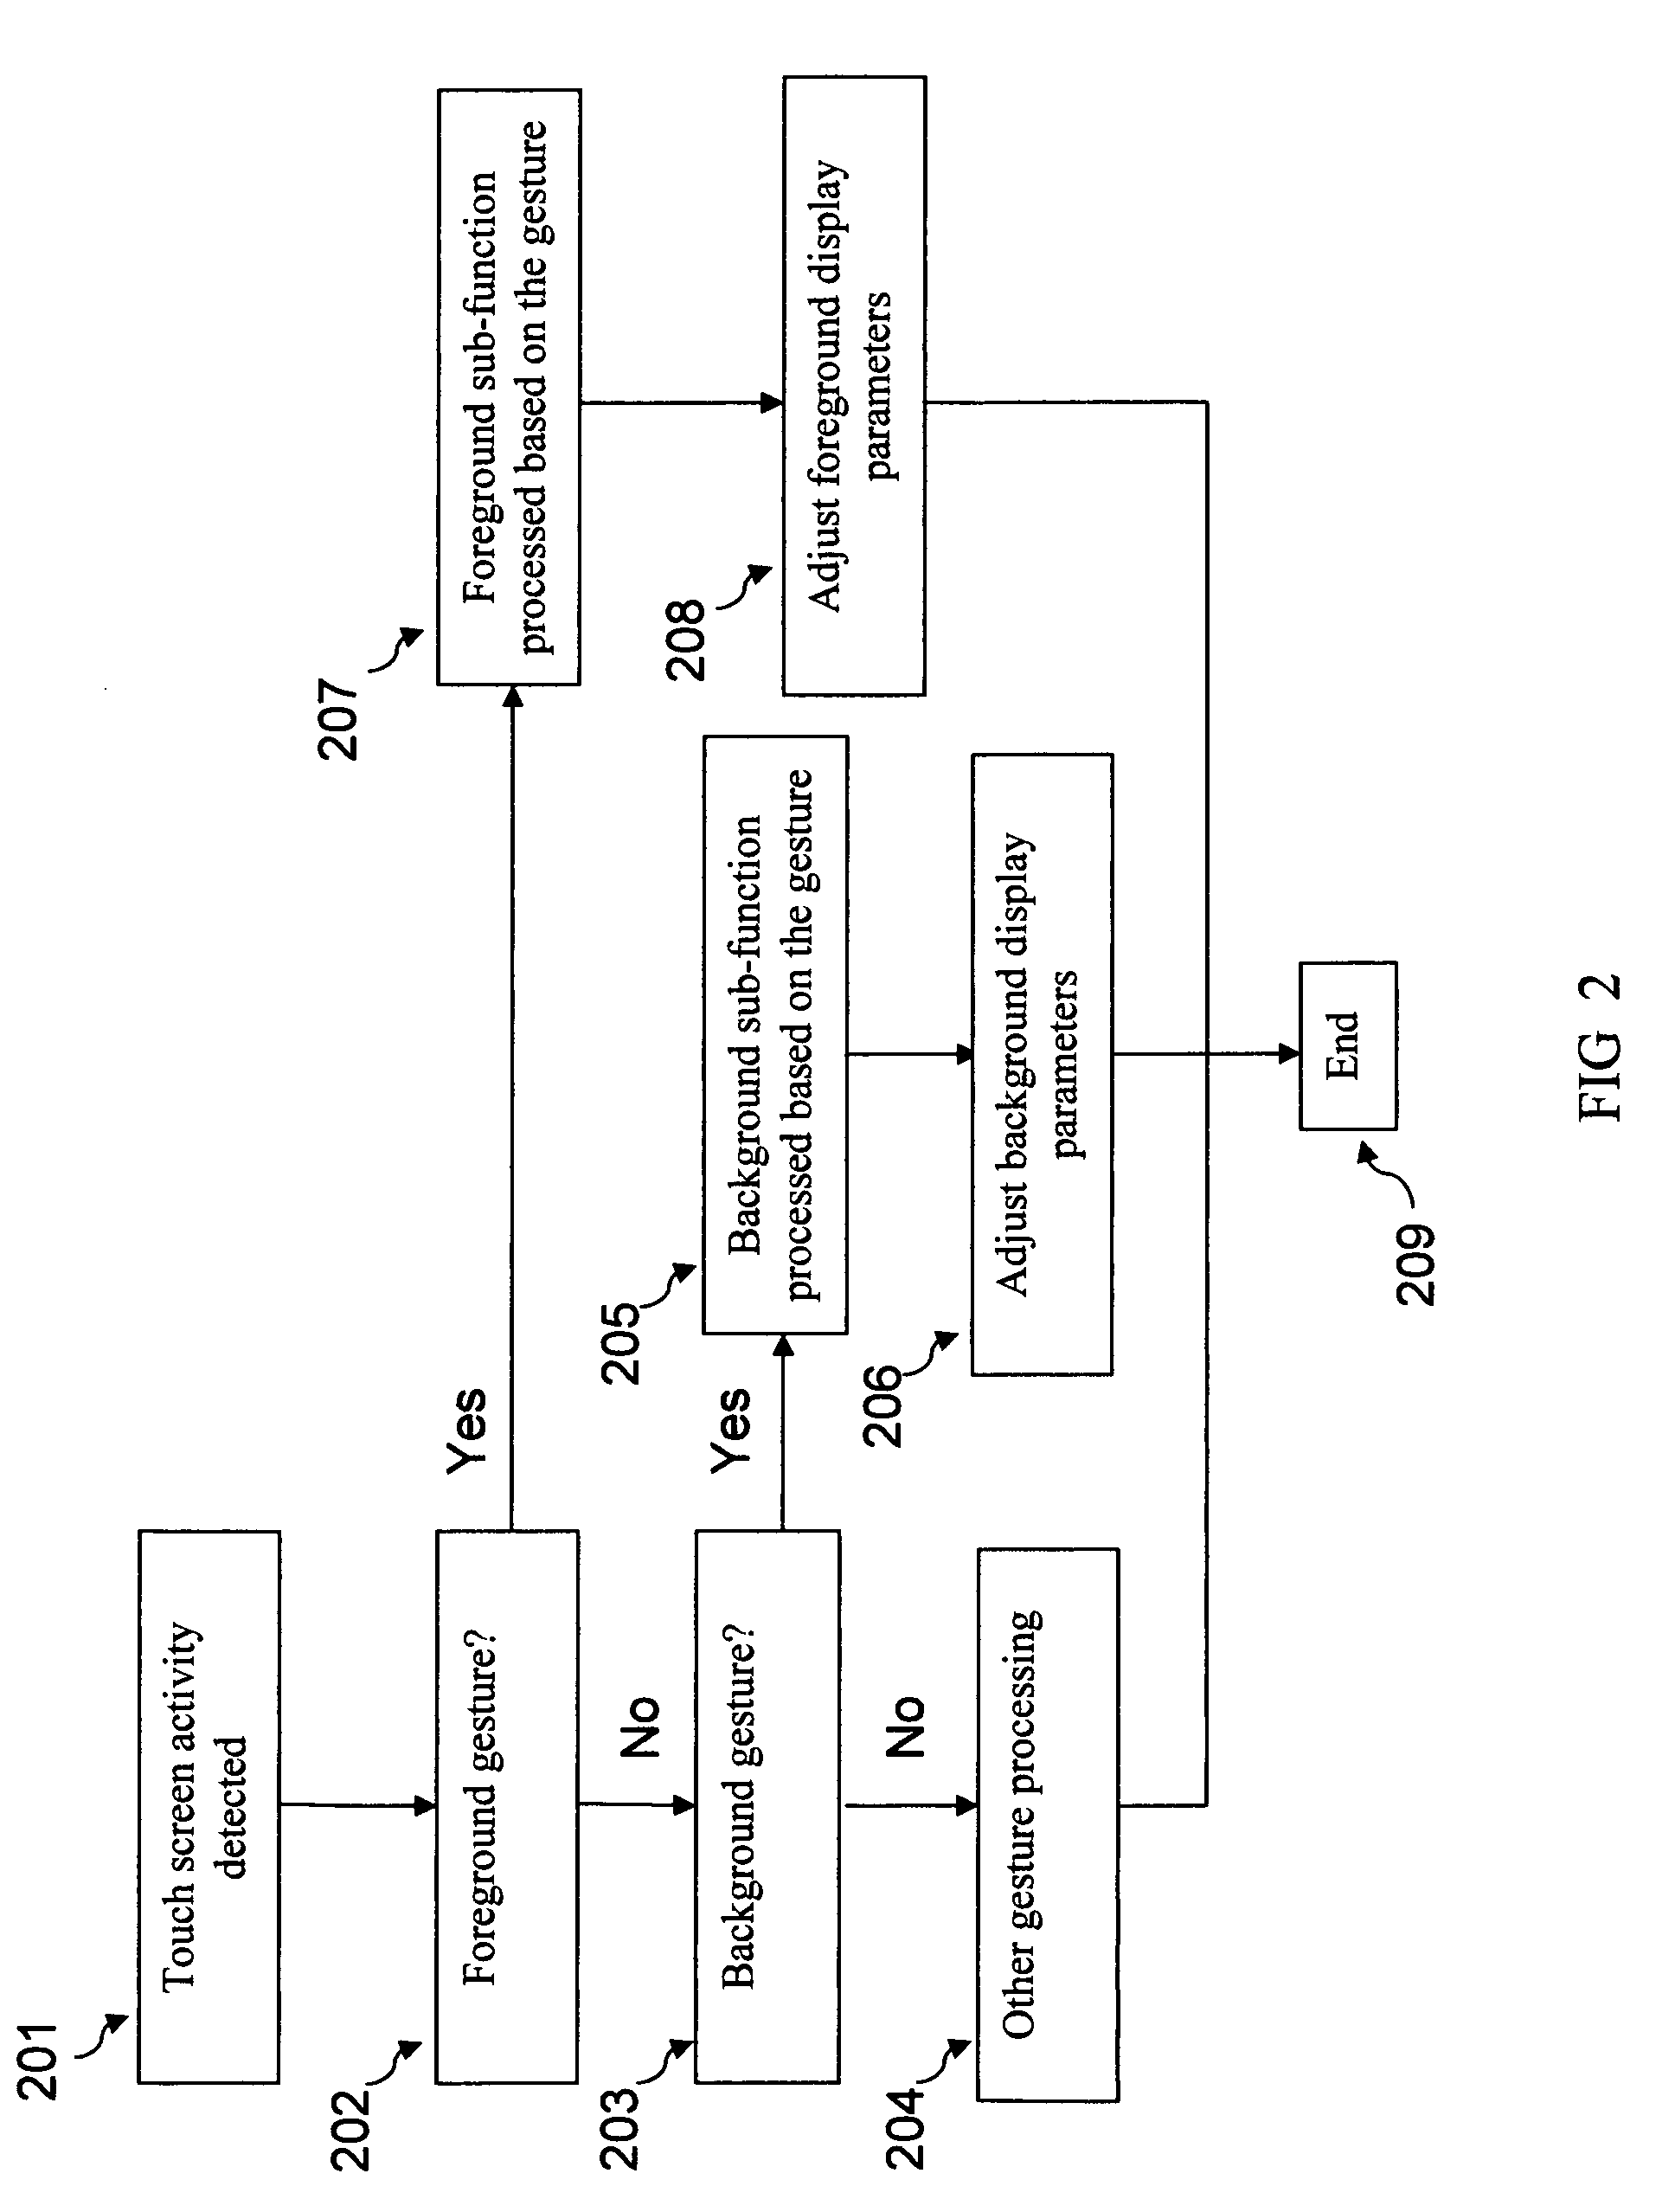 Method and system for integrated consumer experience and social networking